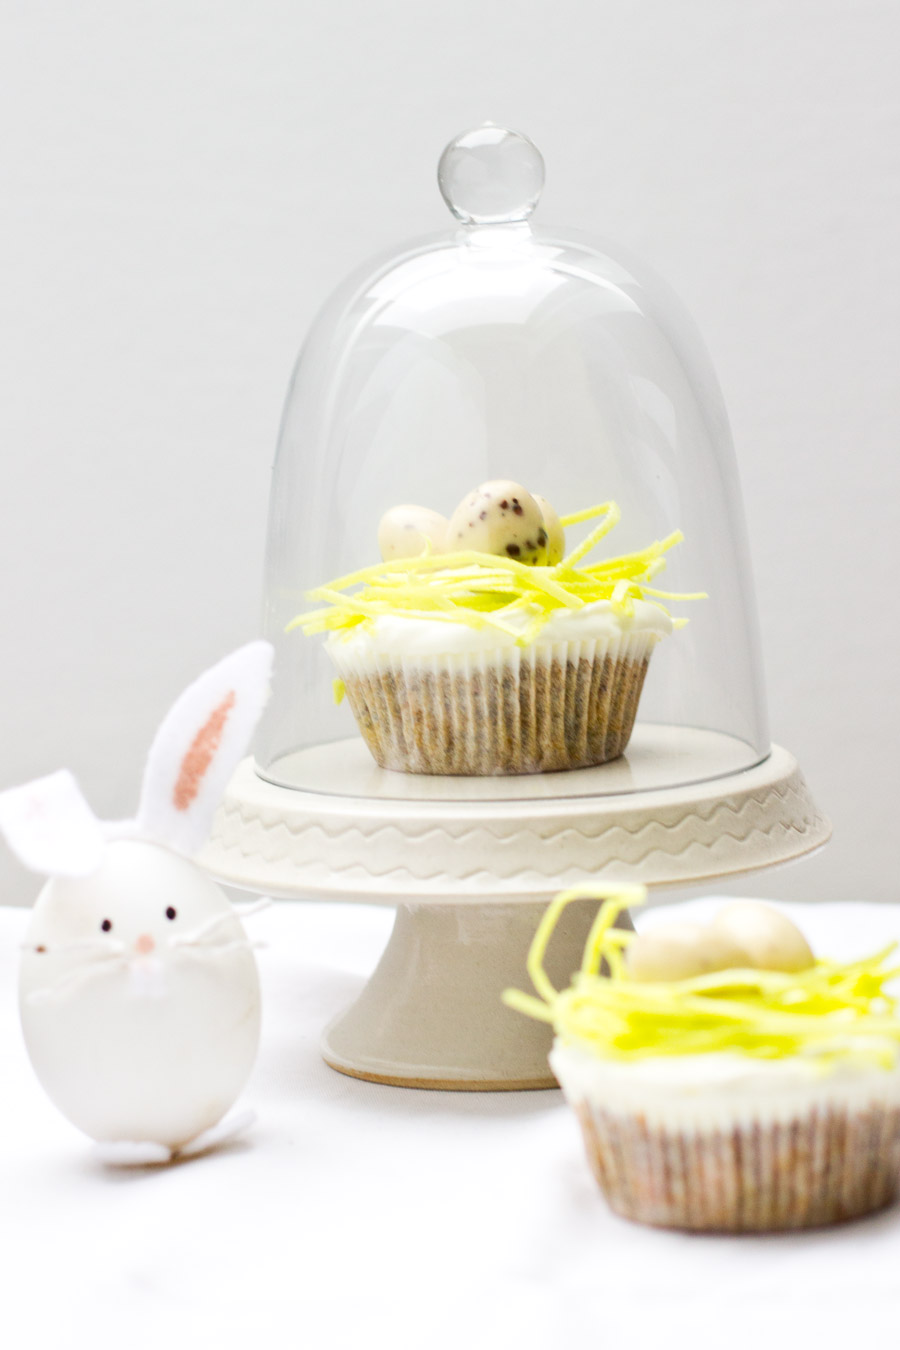 Make this cute poppy and carrot cupcake recipe for an eatable easter table decoration.